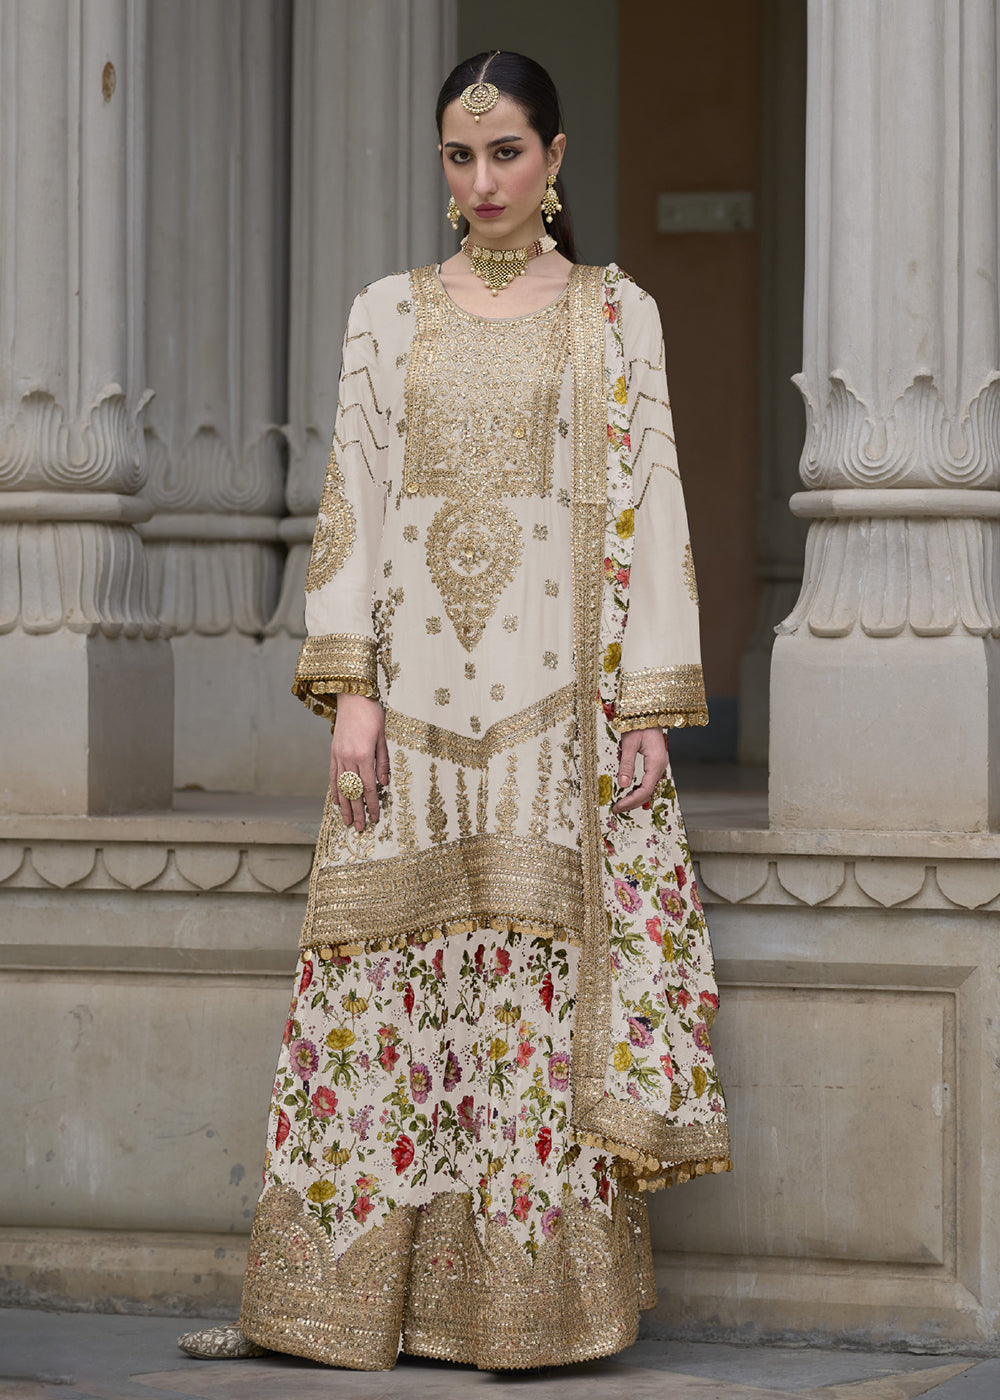 Buy Now Off White Pure Chinnon Pakistani Style Palazzo Suit Online in USA, UK, Canada, Germany, Australia & Worldwide at Empress Clothing.